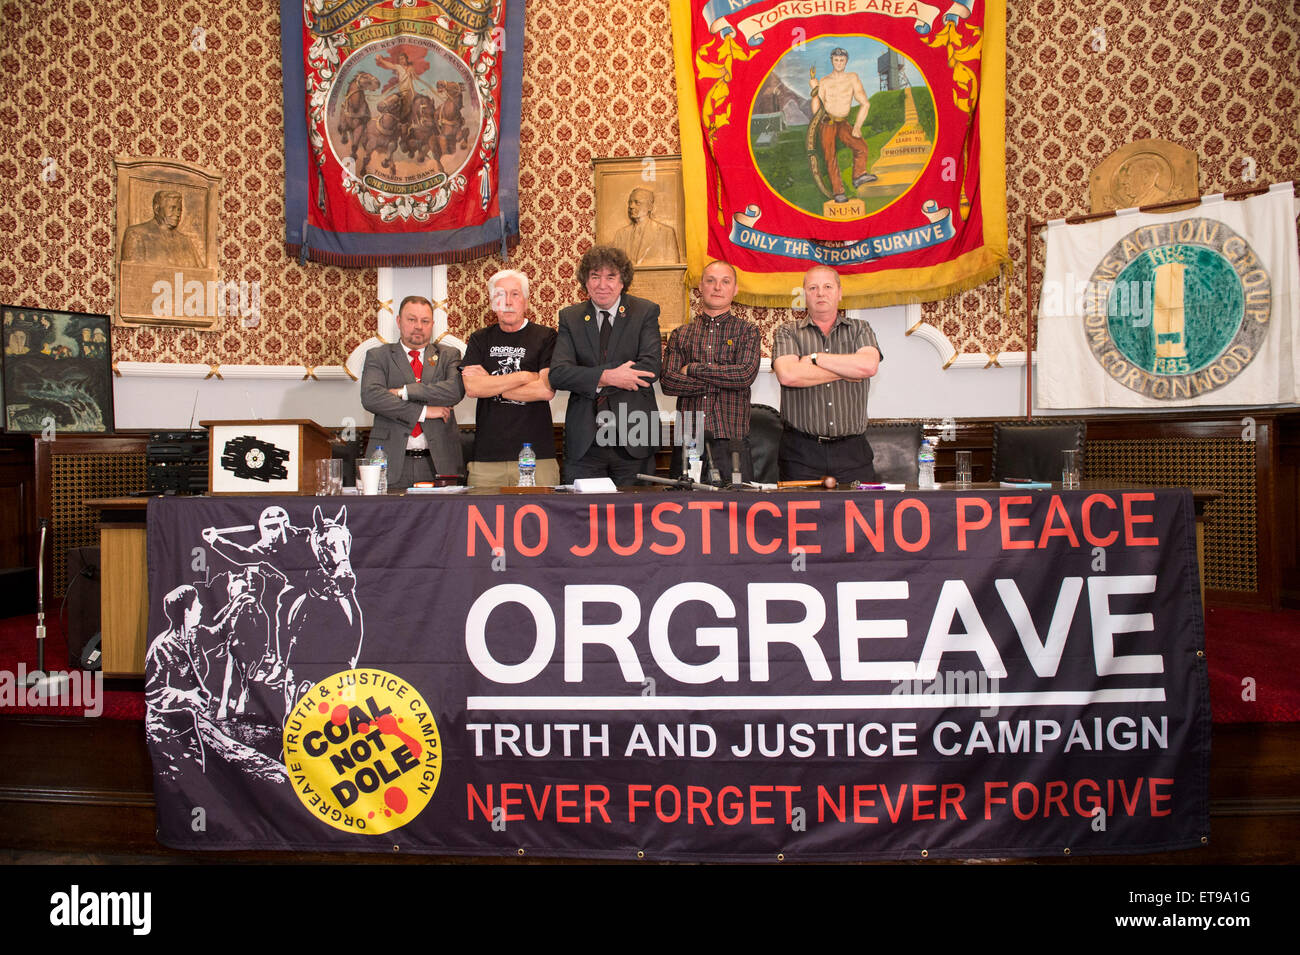 Barnsley, Yorkshire, UK. 12th June, 2015. At the Barnsley Headquarters of the NUM, Members of the Orgreave Truth and Justice Campaign release the findings of the IPCC report in to Orgreave Coking Plant in 1984. L-R Chris Kitchen (President NUM), Granville Williams (Truth and Justice Campiagn) Chris Skidmore (Yorkshire Area President, NUM), Joe Rollin (Unite the Union) Paul Winter (miner arrested at Orgreave) Credit:  Mark Harvey/Alamy Live News Stock Photo